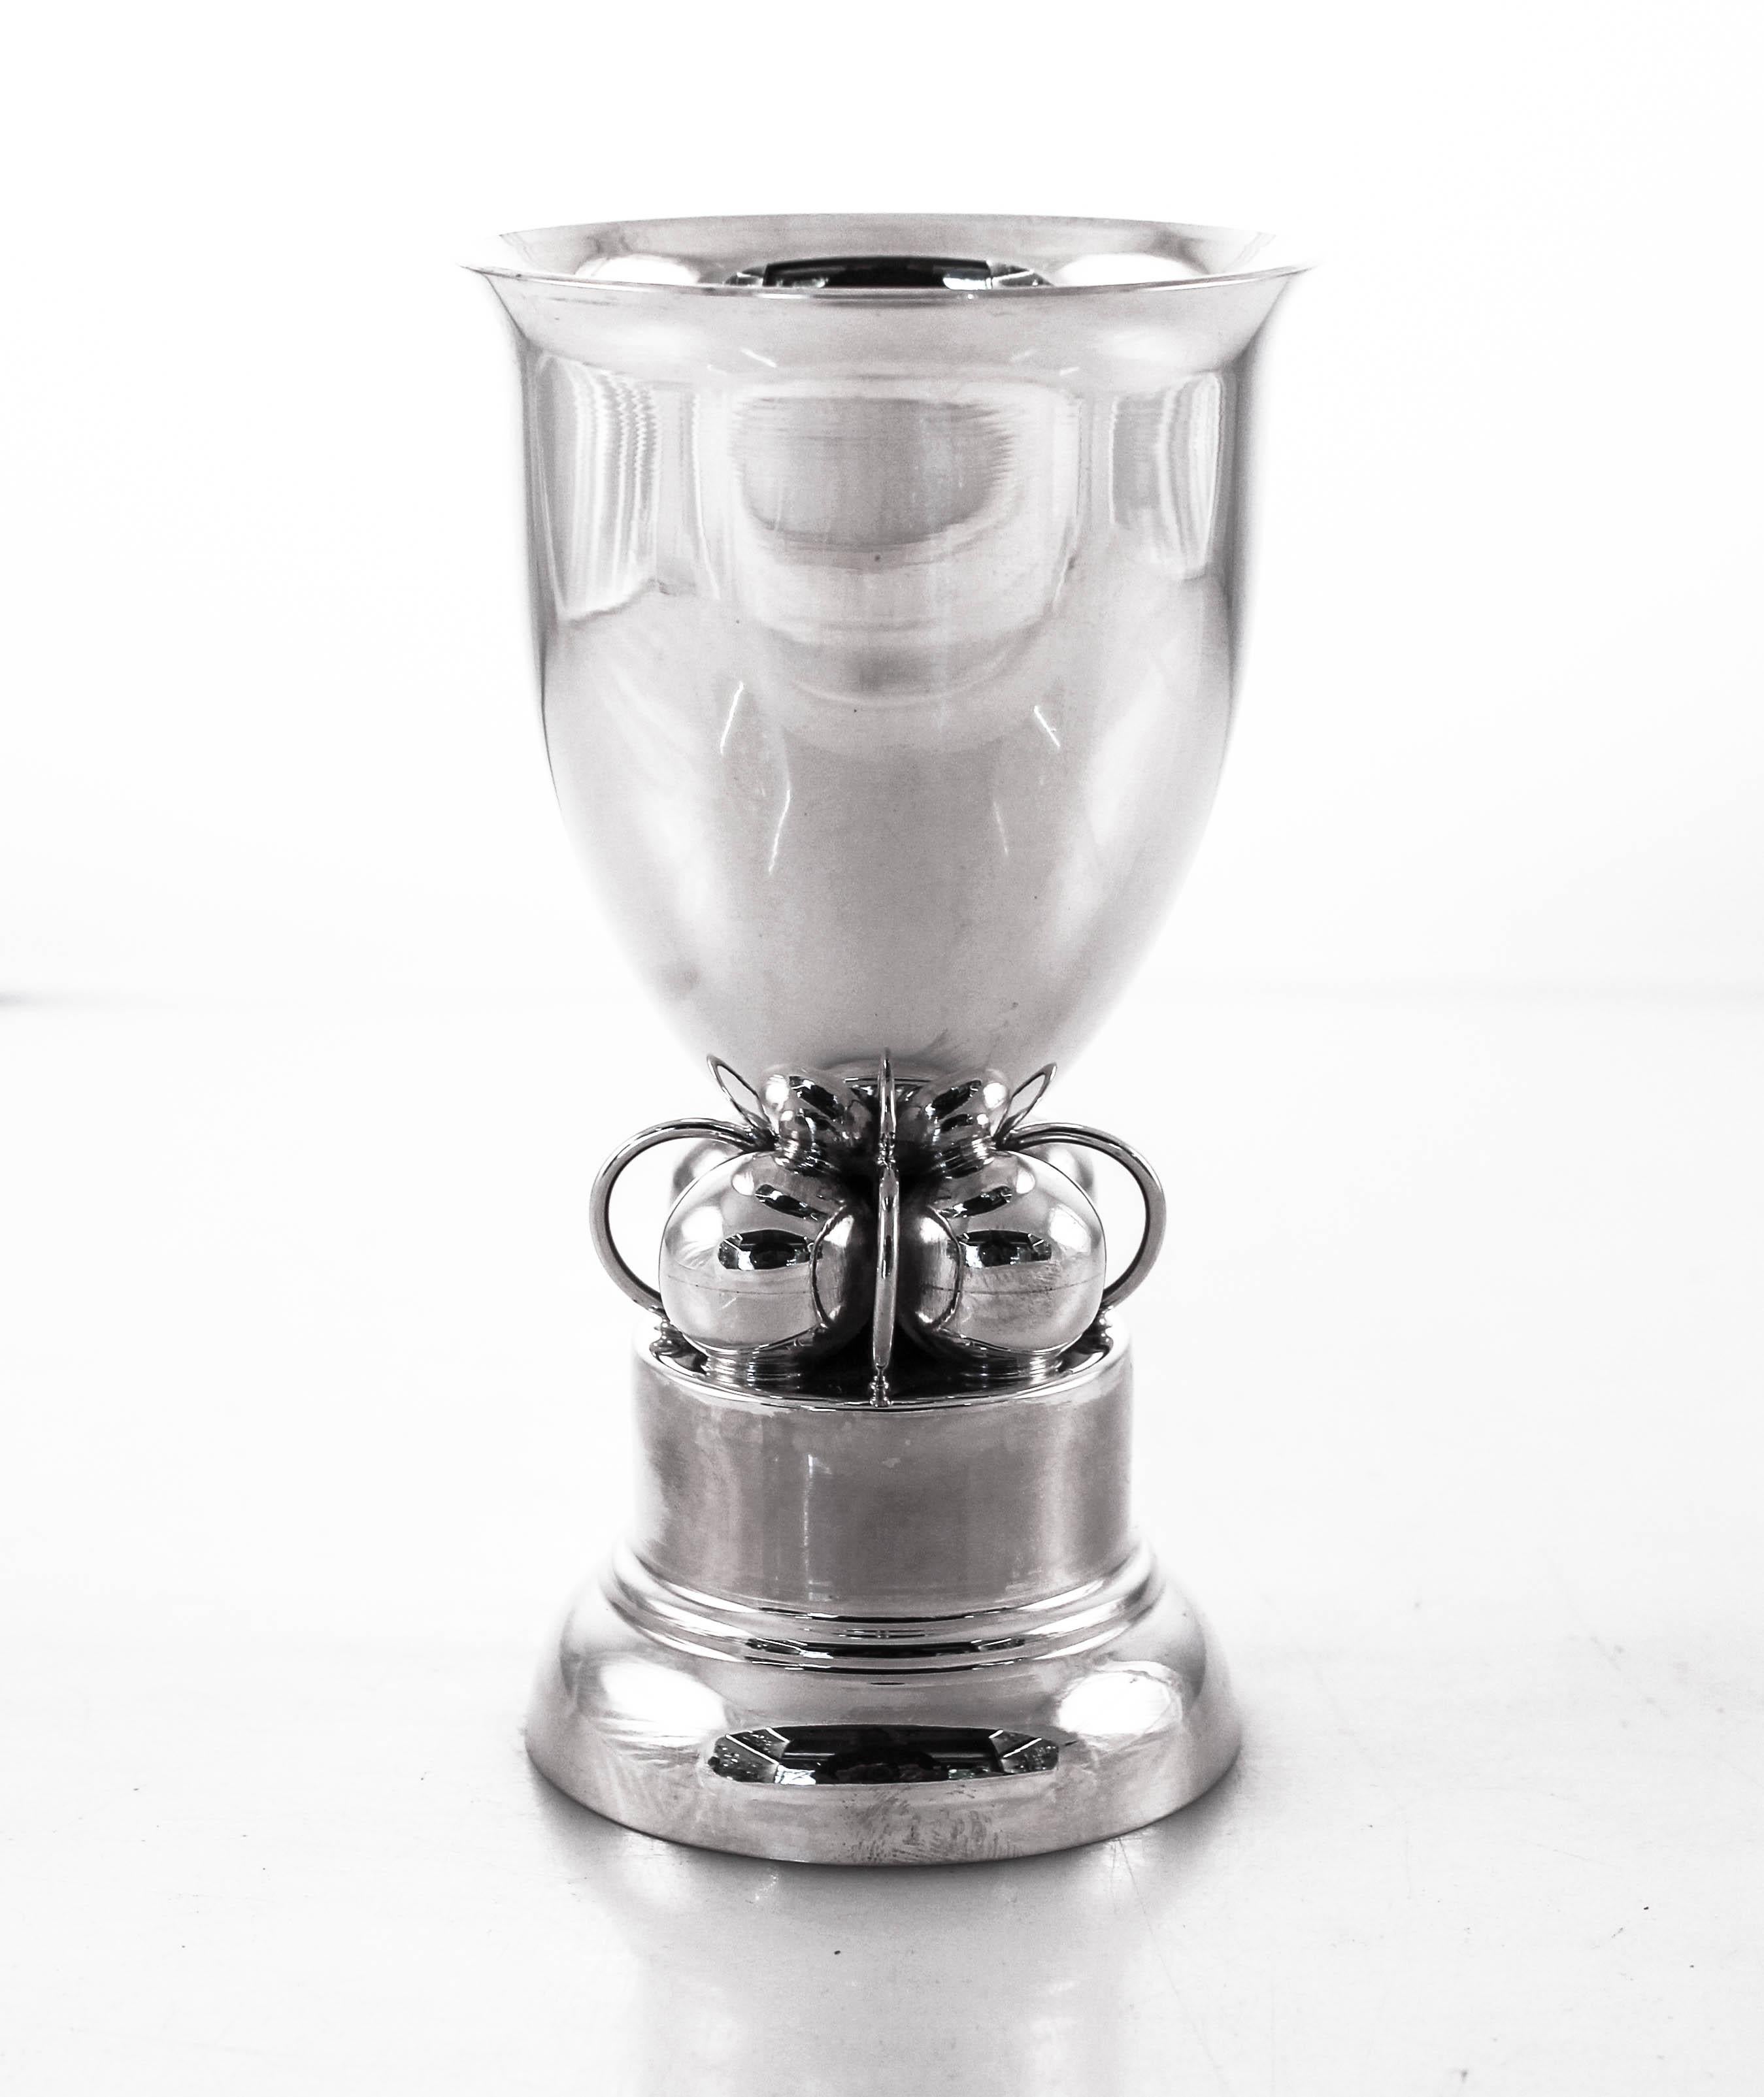 This lovely sterling silver goblet has a Art Deco design. It has four balls in the center intercepted by rings. It stands on a non-weighted base that gives it a tall regal appearance. If I were to describe it in one word, “Jensenesque”. The inside